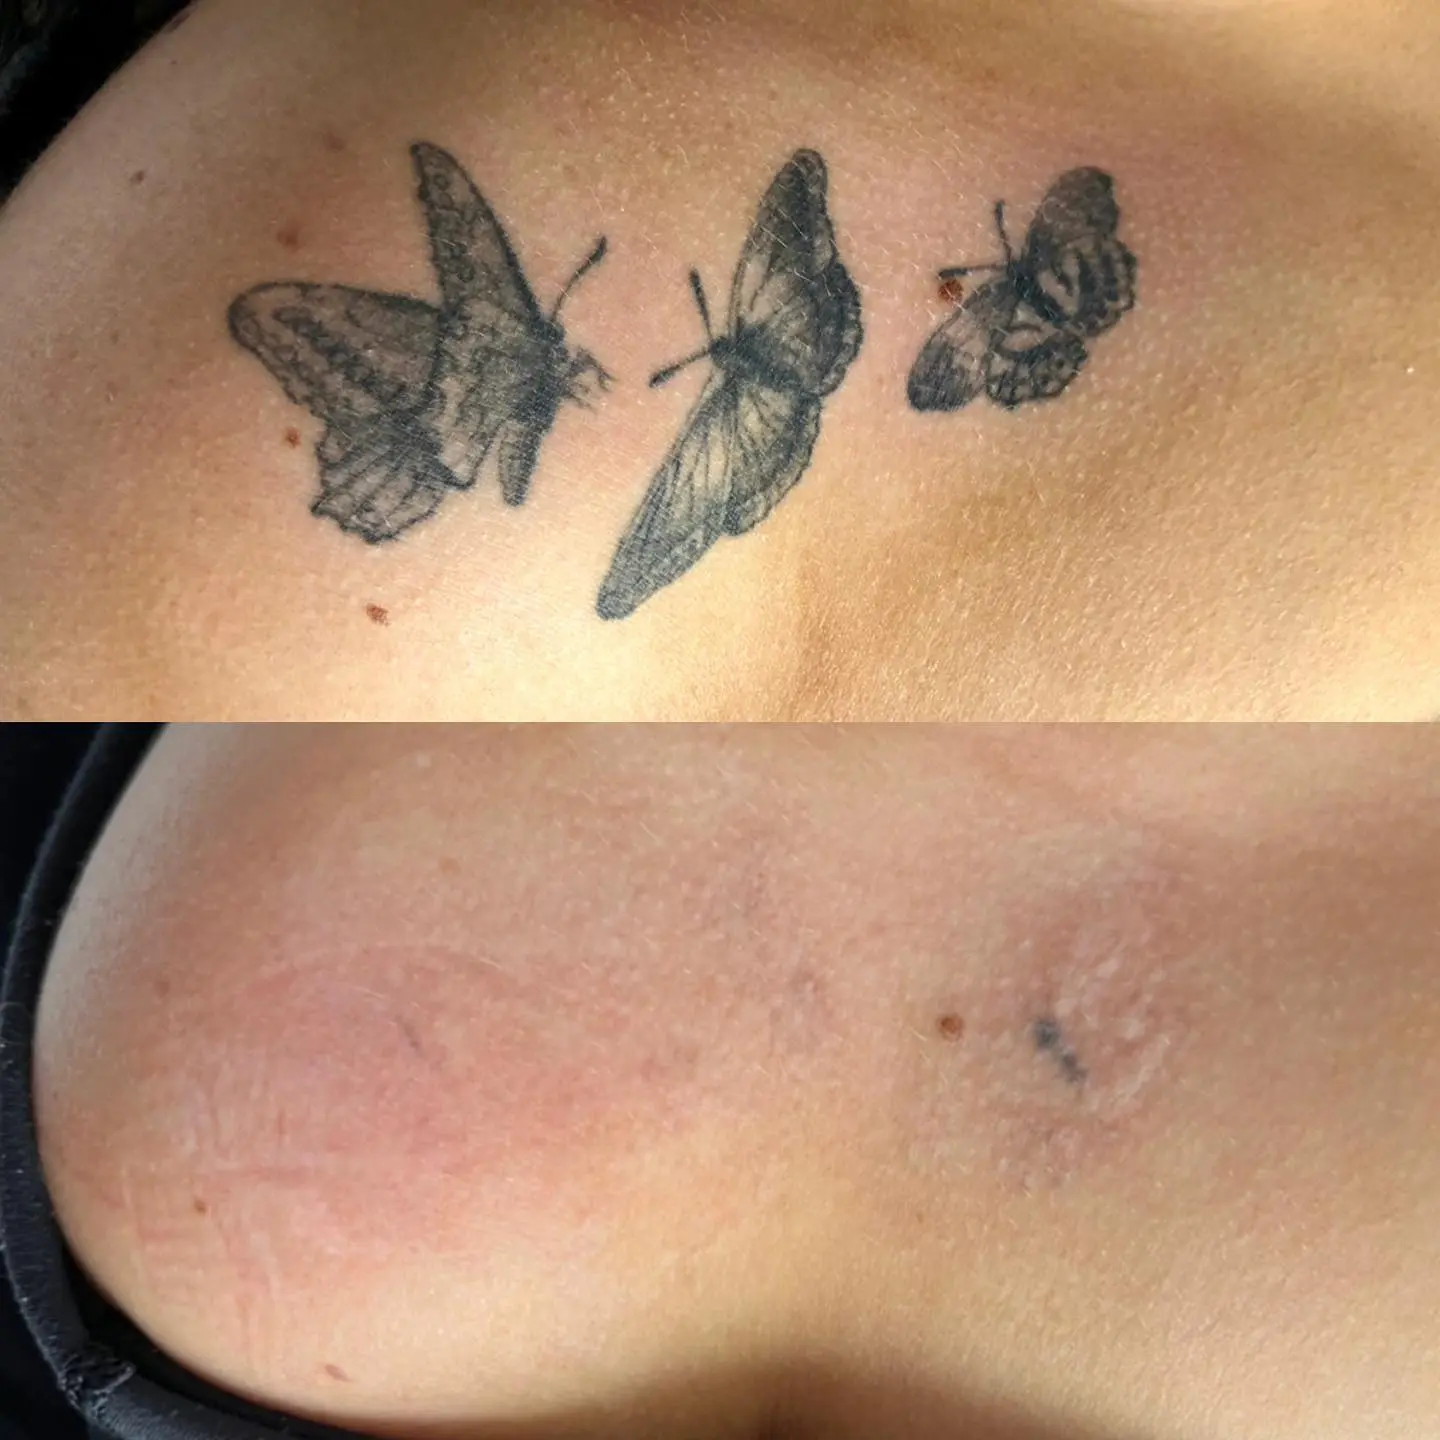 Tattoo Removal Prices